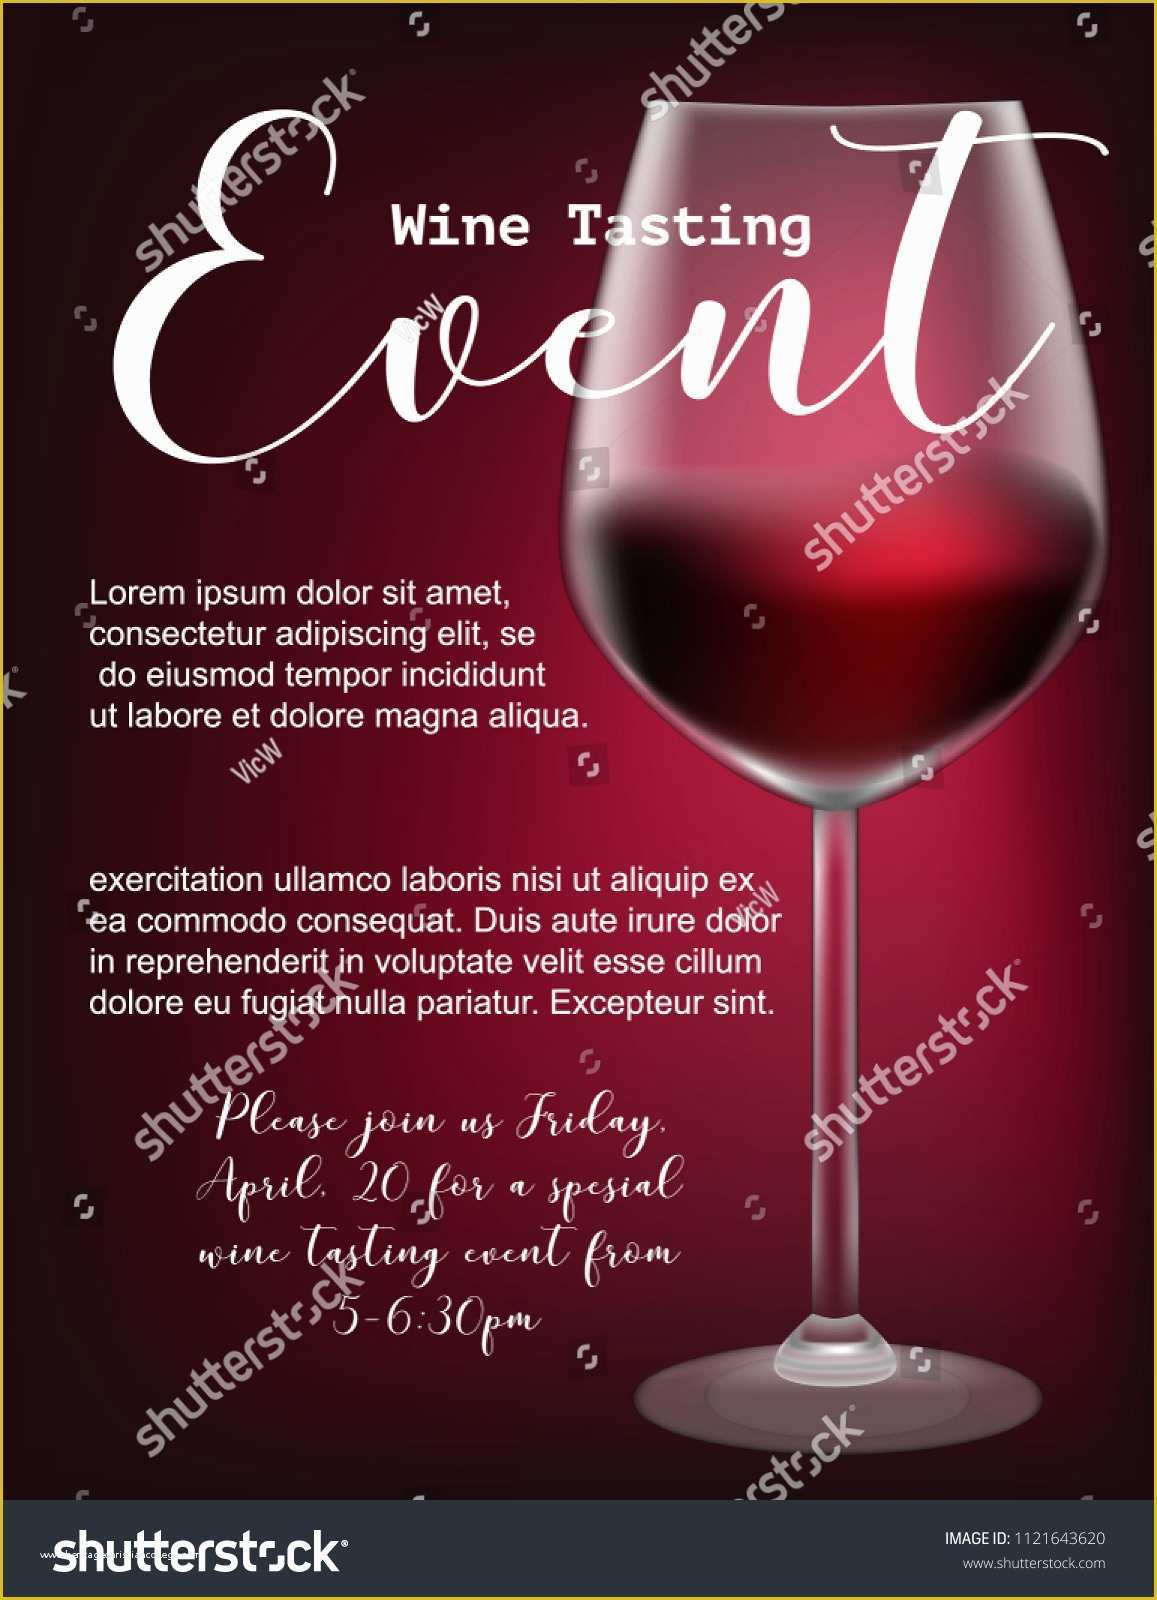 Free Wine Tasting Flyer Template Of Wine Tasting event Flyer Template Free Unique Party Psd by